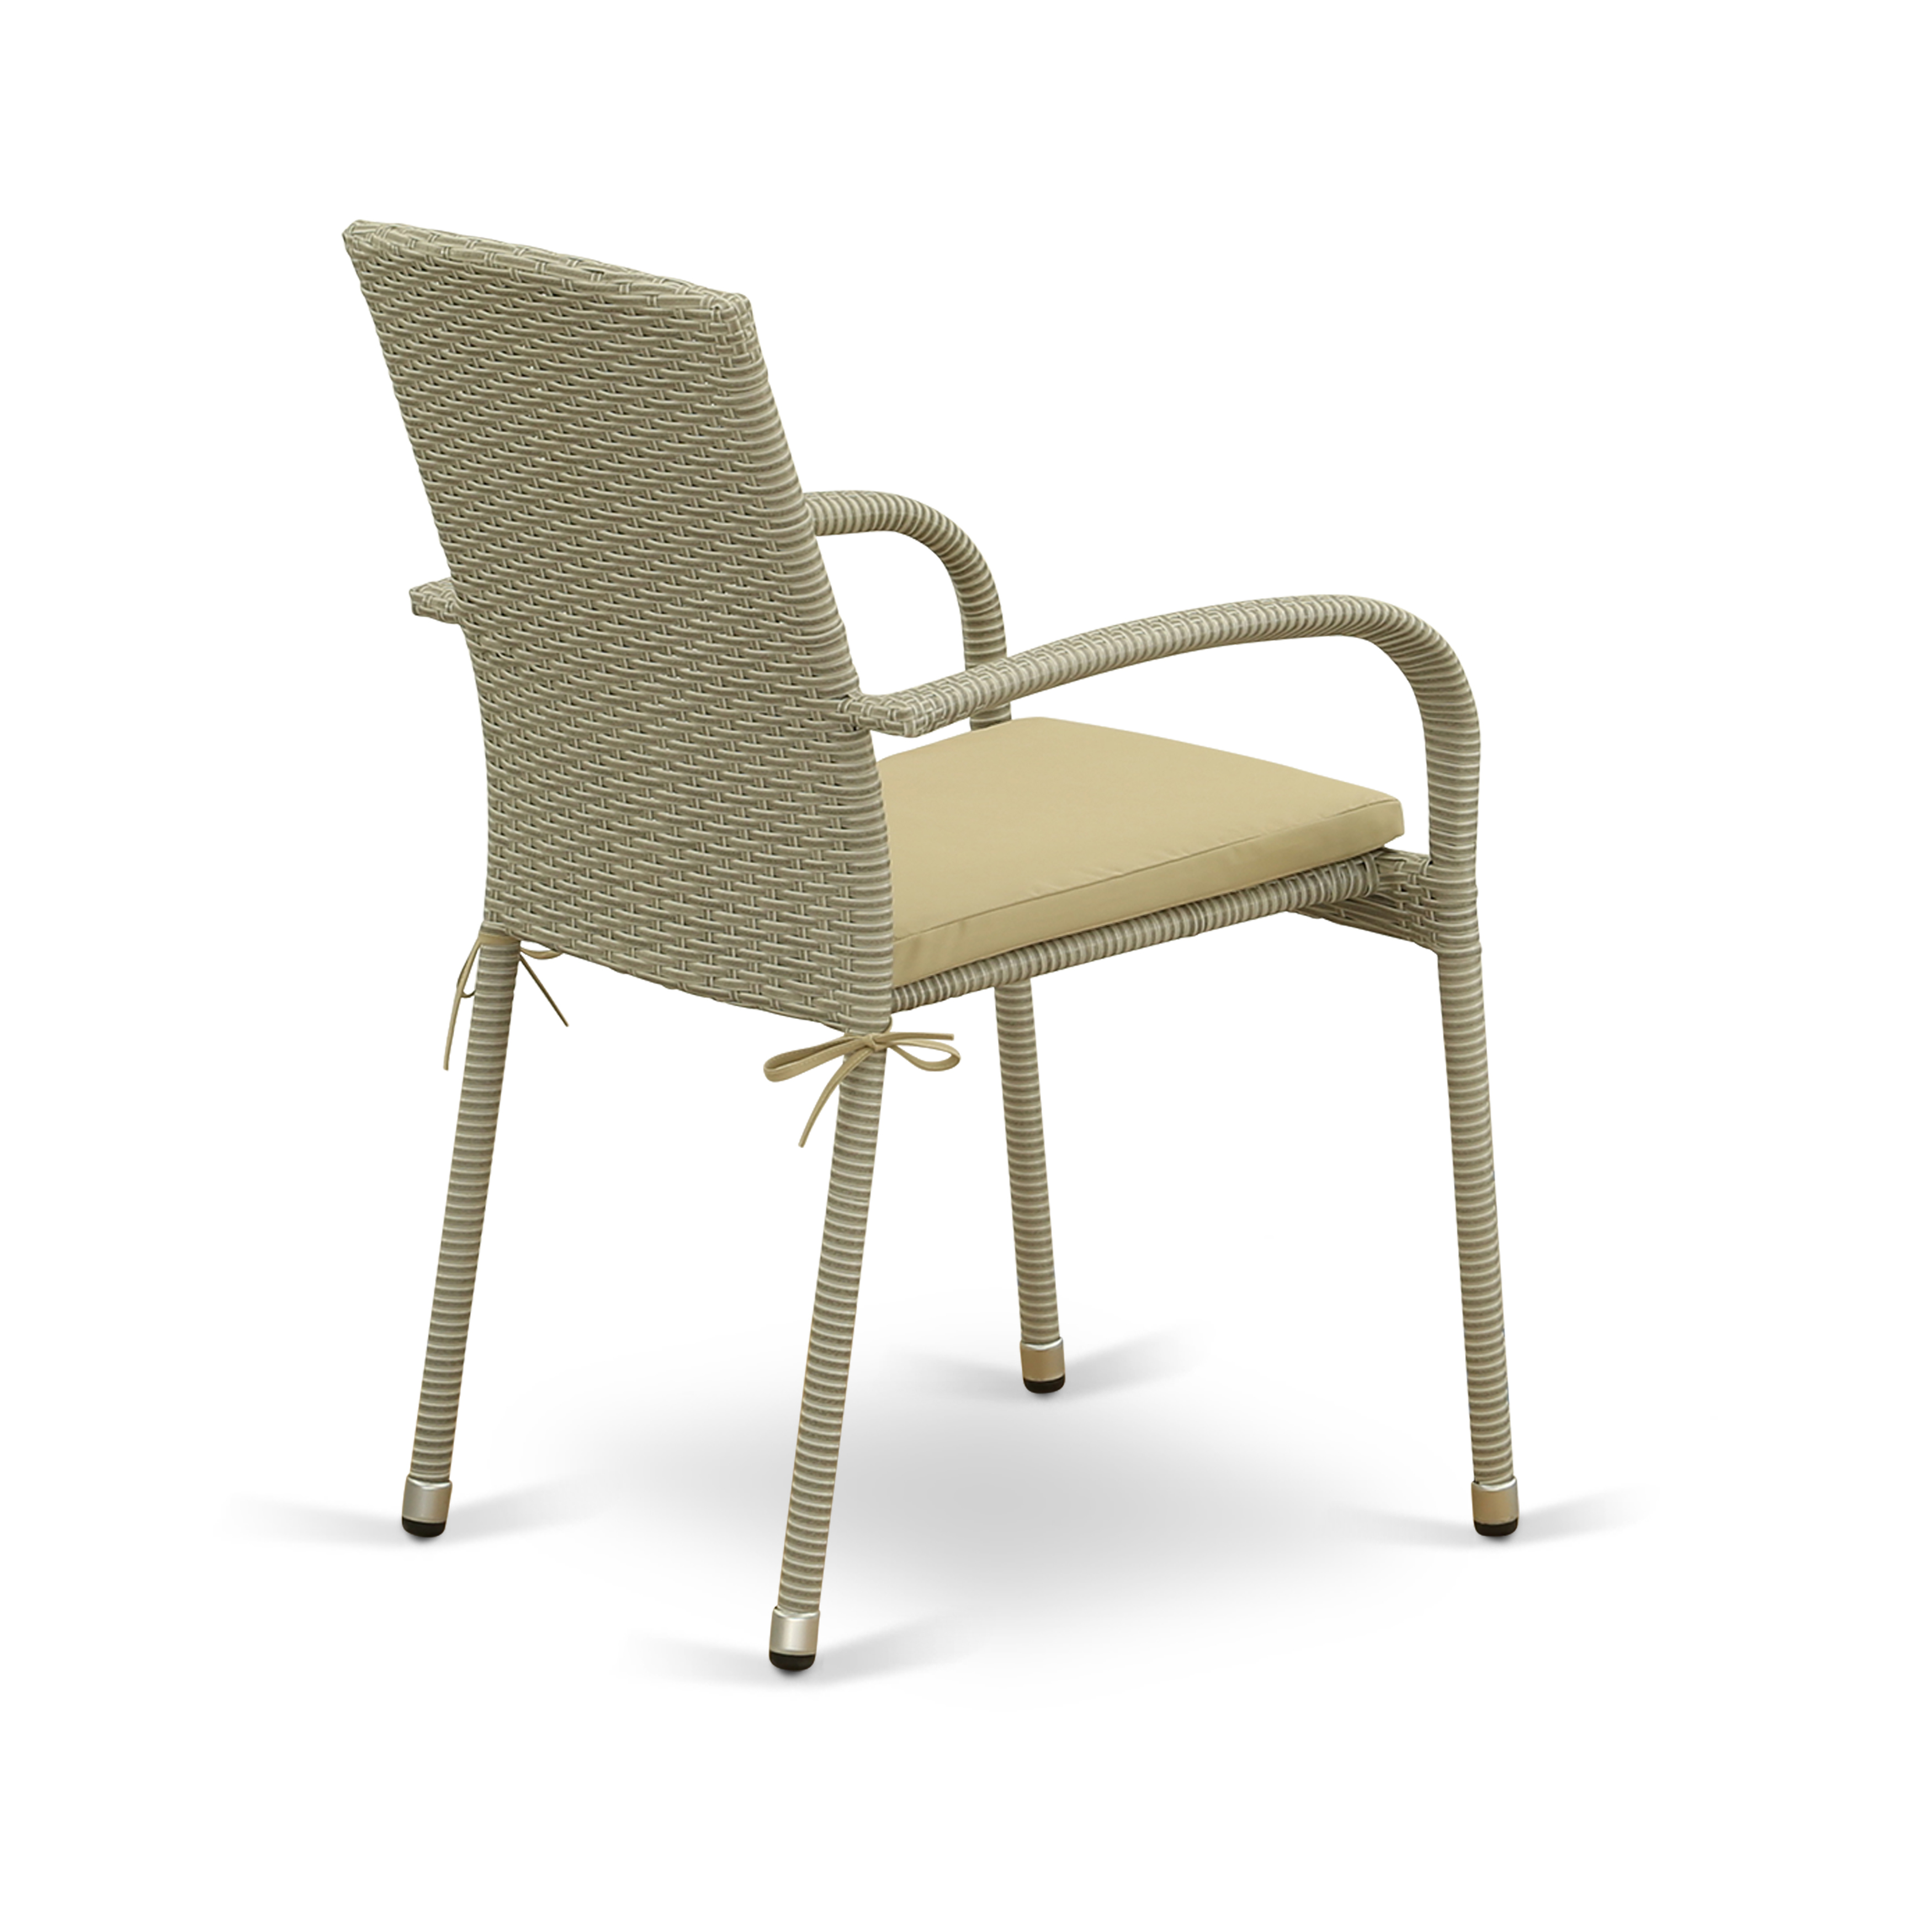 East West Furniture Outdoor Dining Chair - Wicker - Set of 2 - with Cushion - Natural and Beige - image 5 of 7